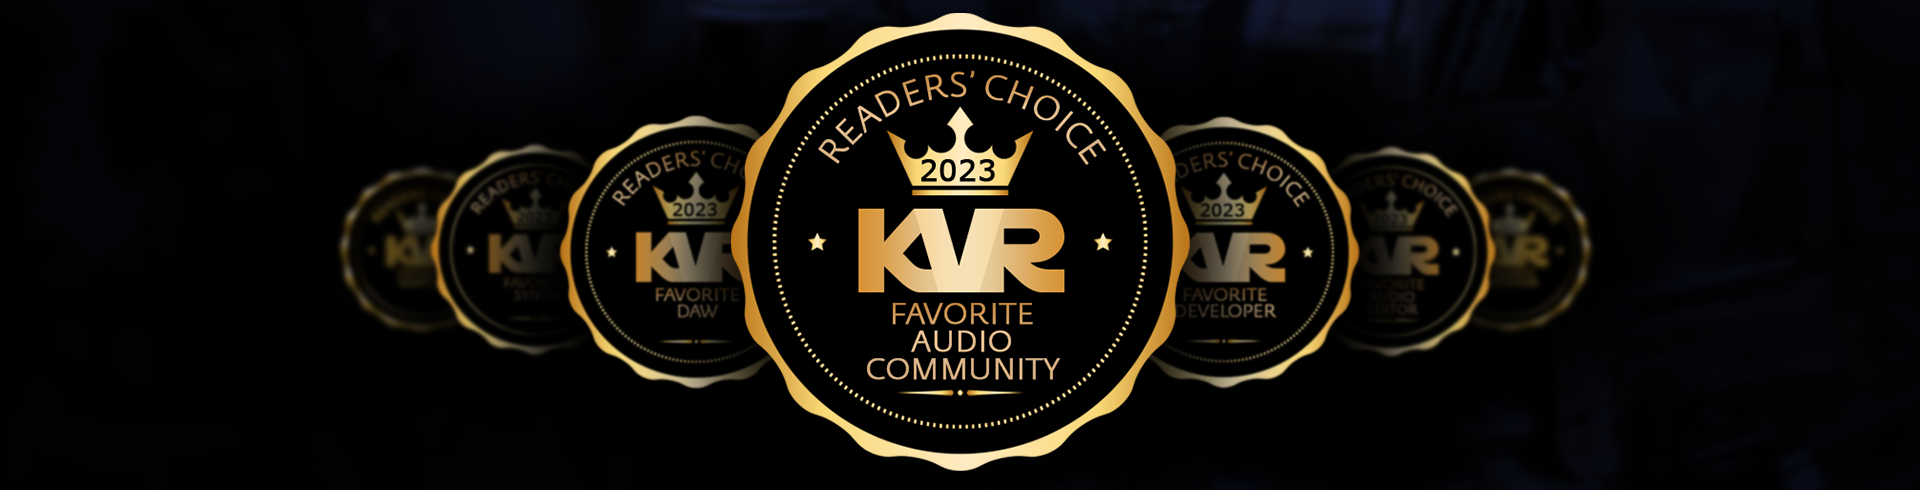 KVR Readers' Choice Awards 2023: Nominations Now Open